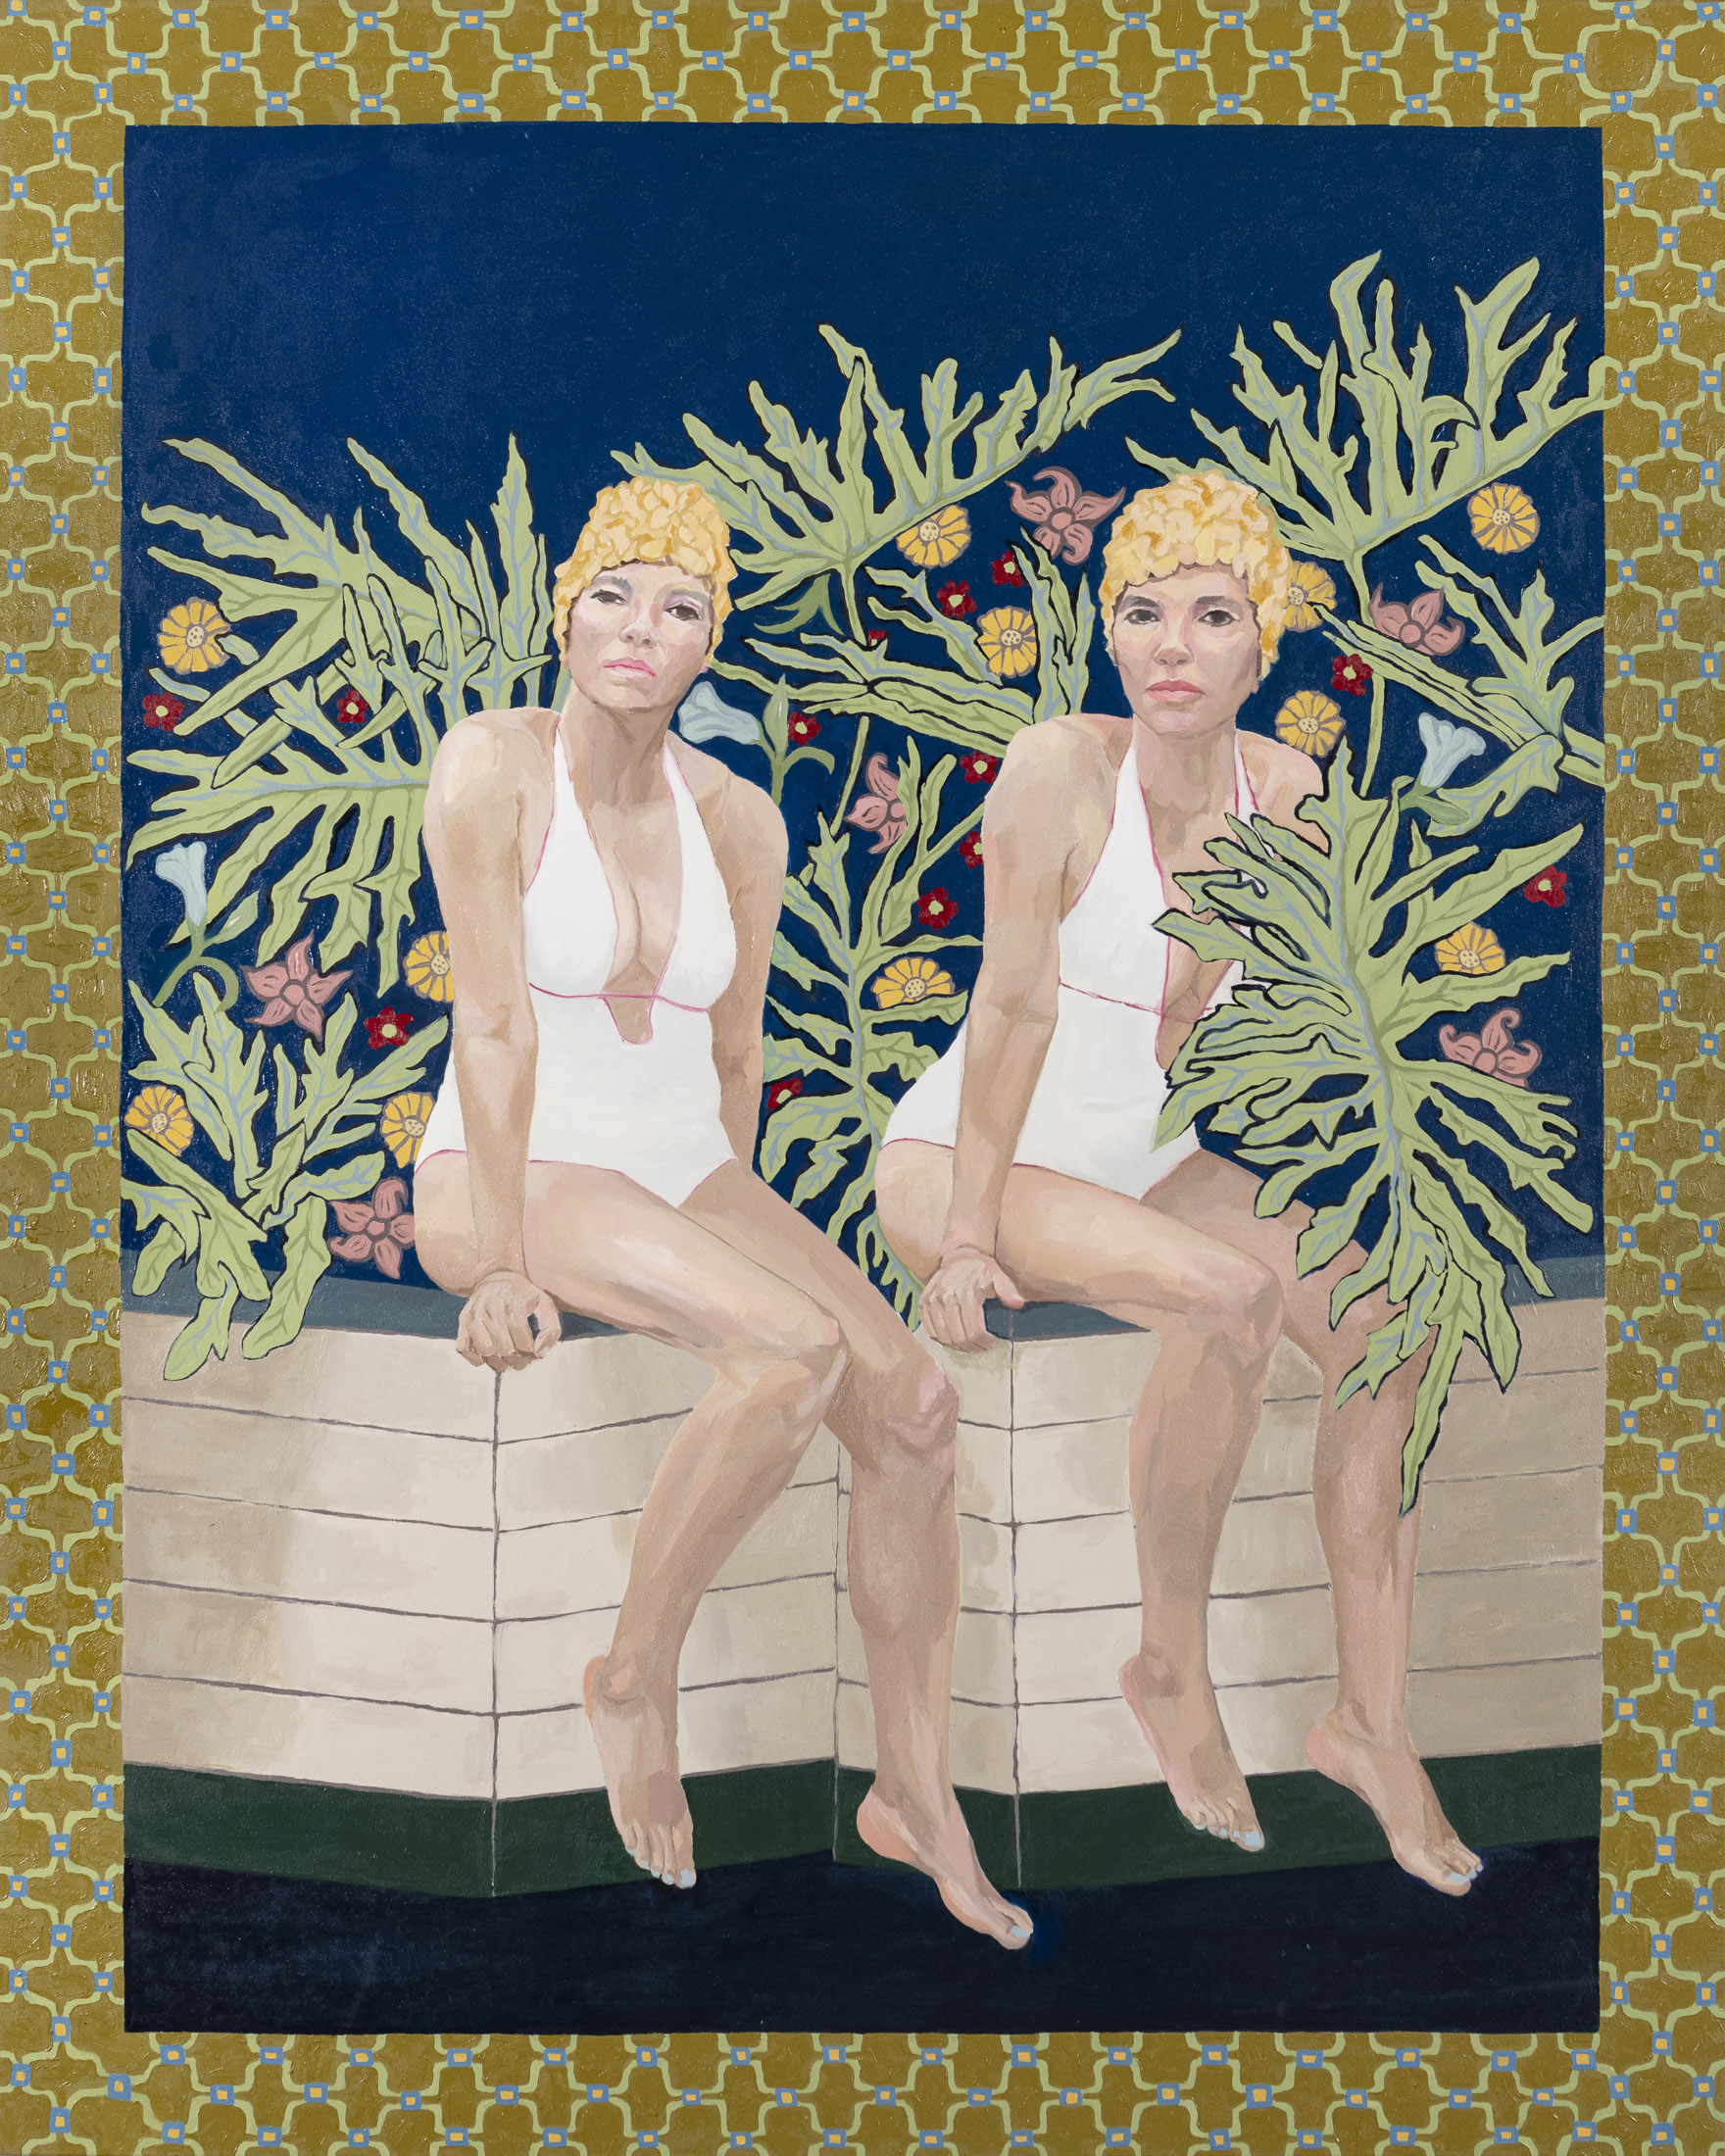 This is a painting of two light-skinned Black women dressed in white swimsuits and bathing caps sitting on a planter filled with tropical plants.